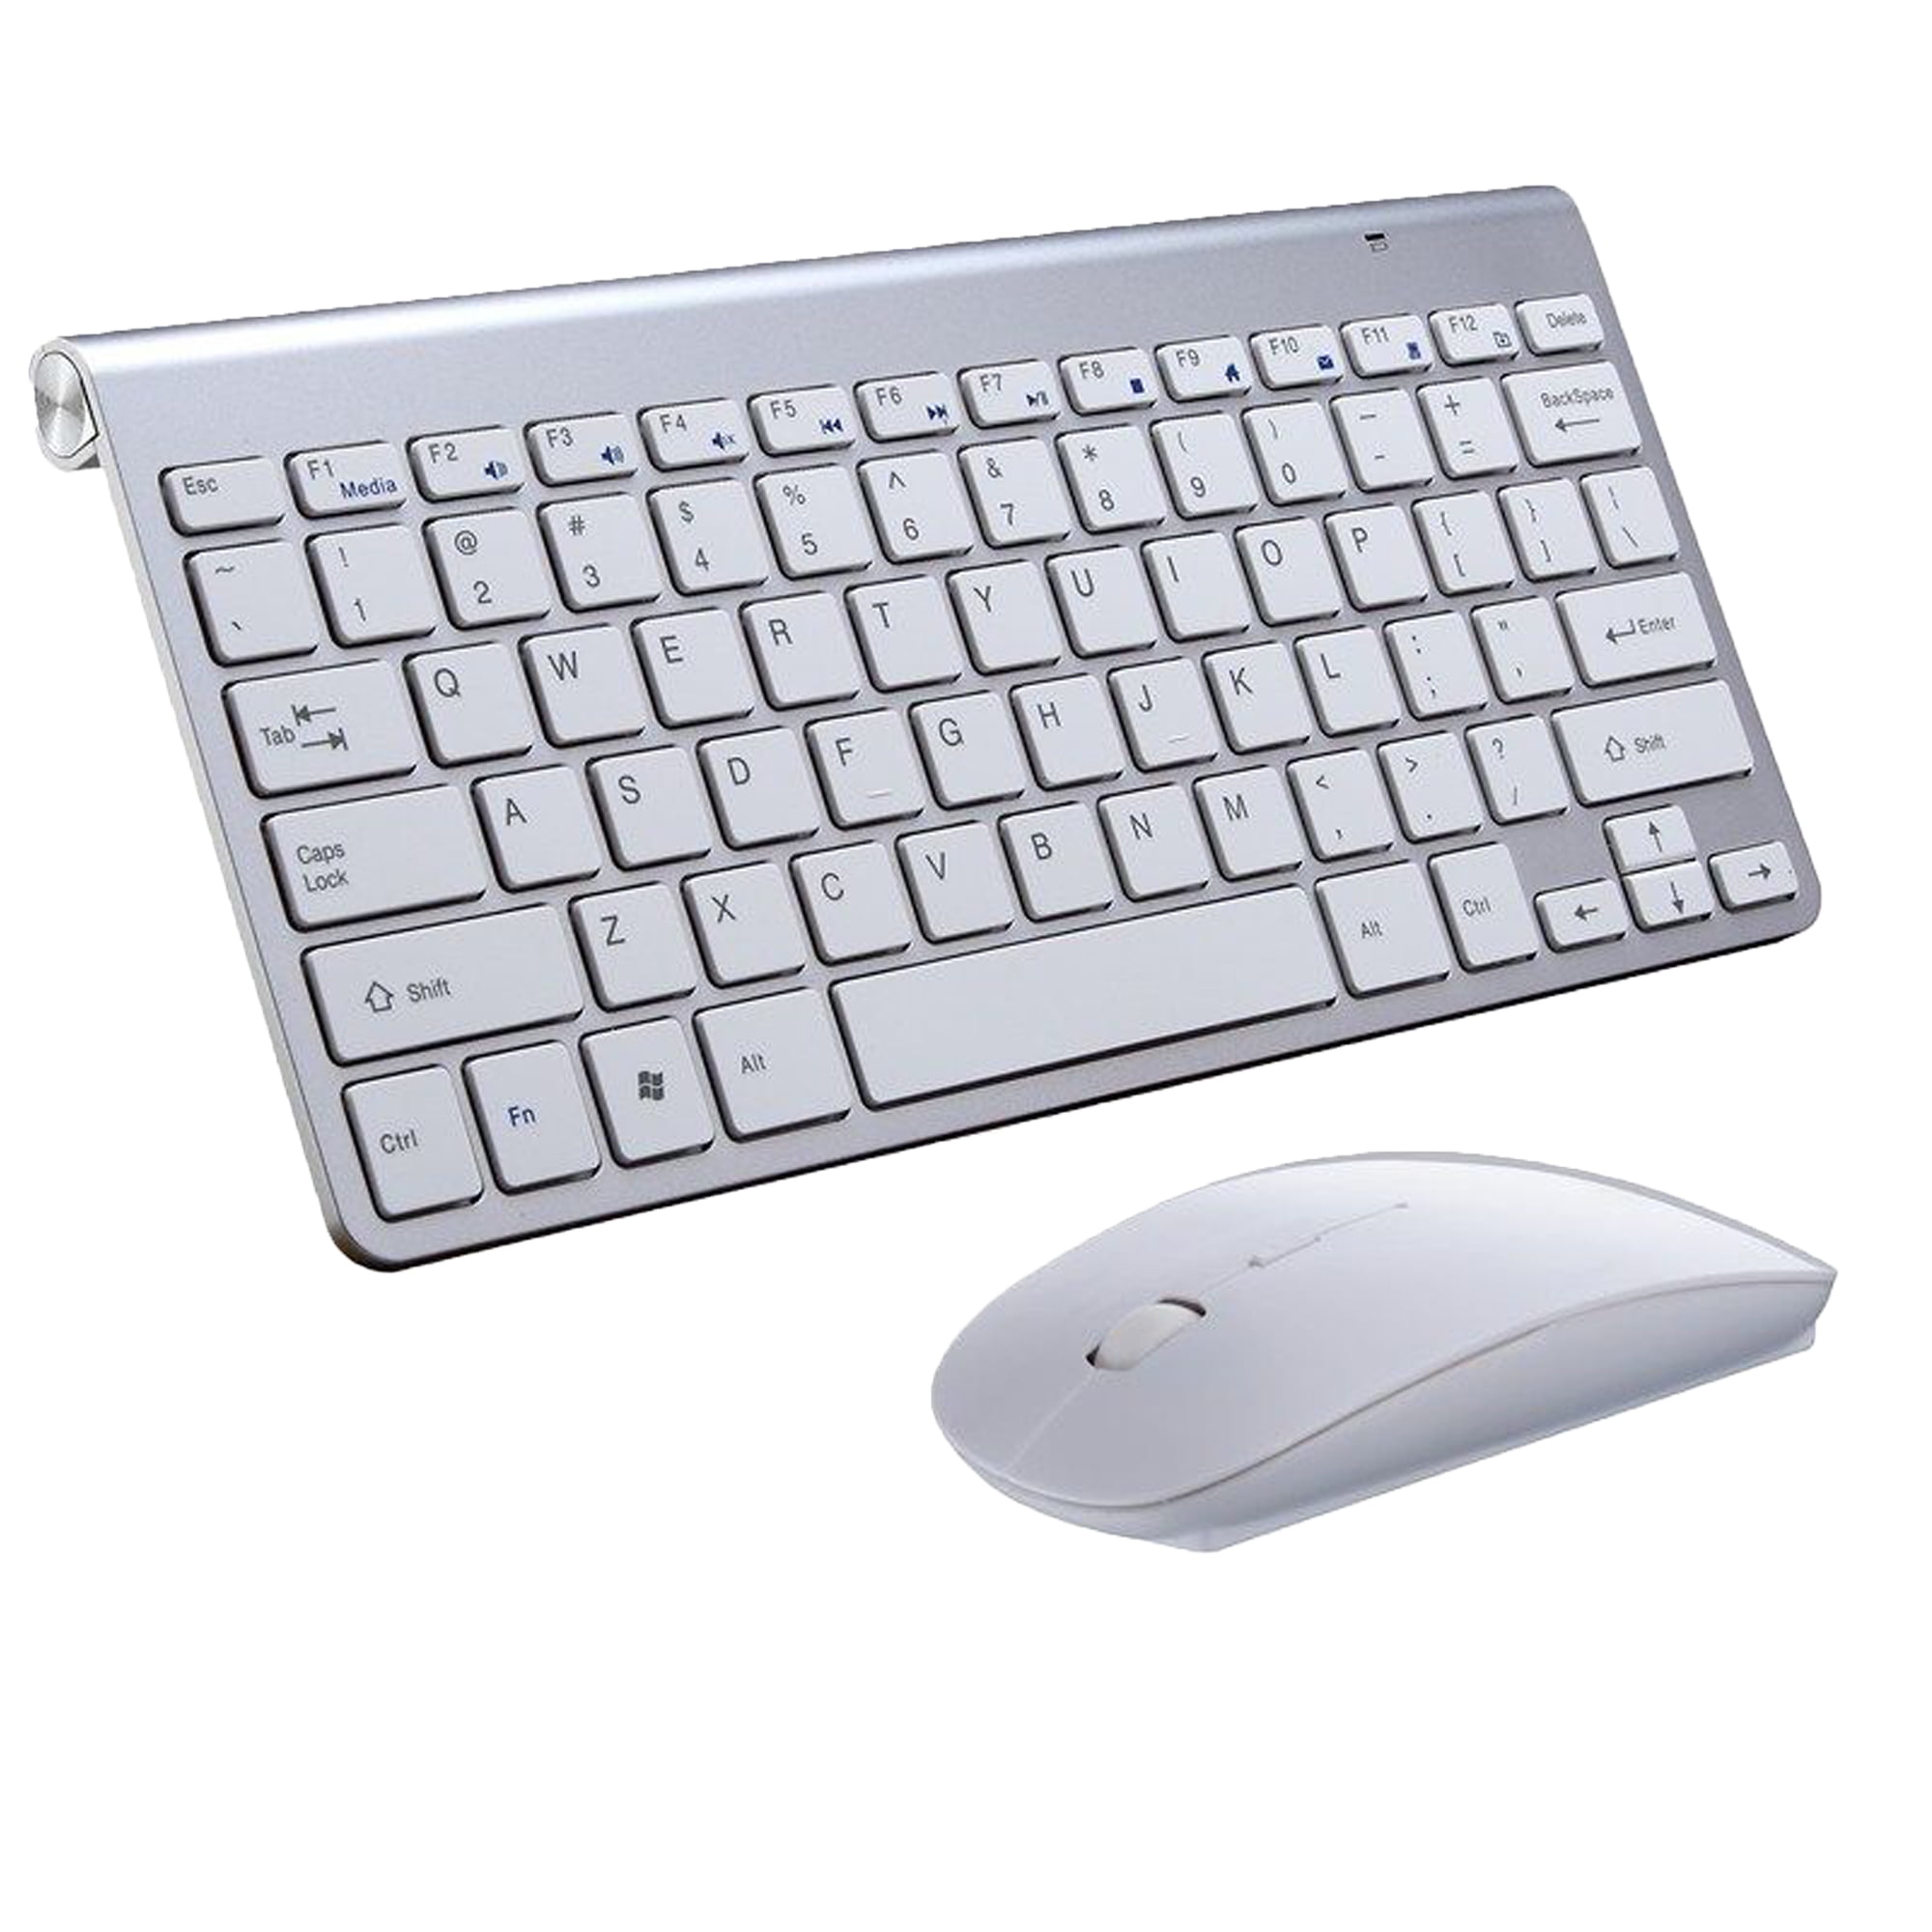 Mini 2.4G Wireless Keyboard And Mouse Combo Set For Mac Apple PC Slim USA 